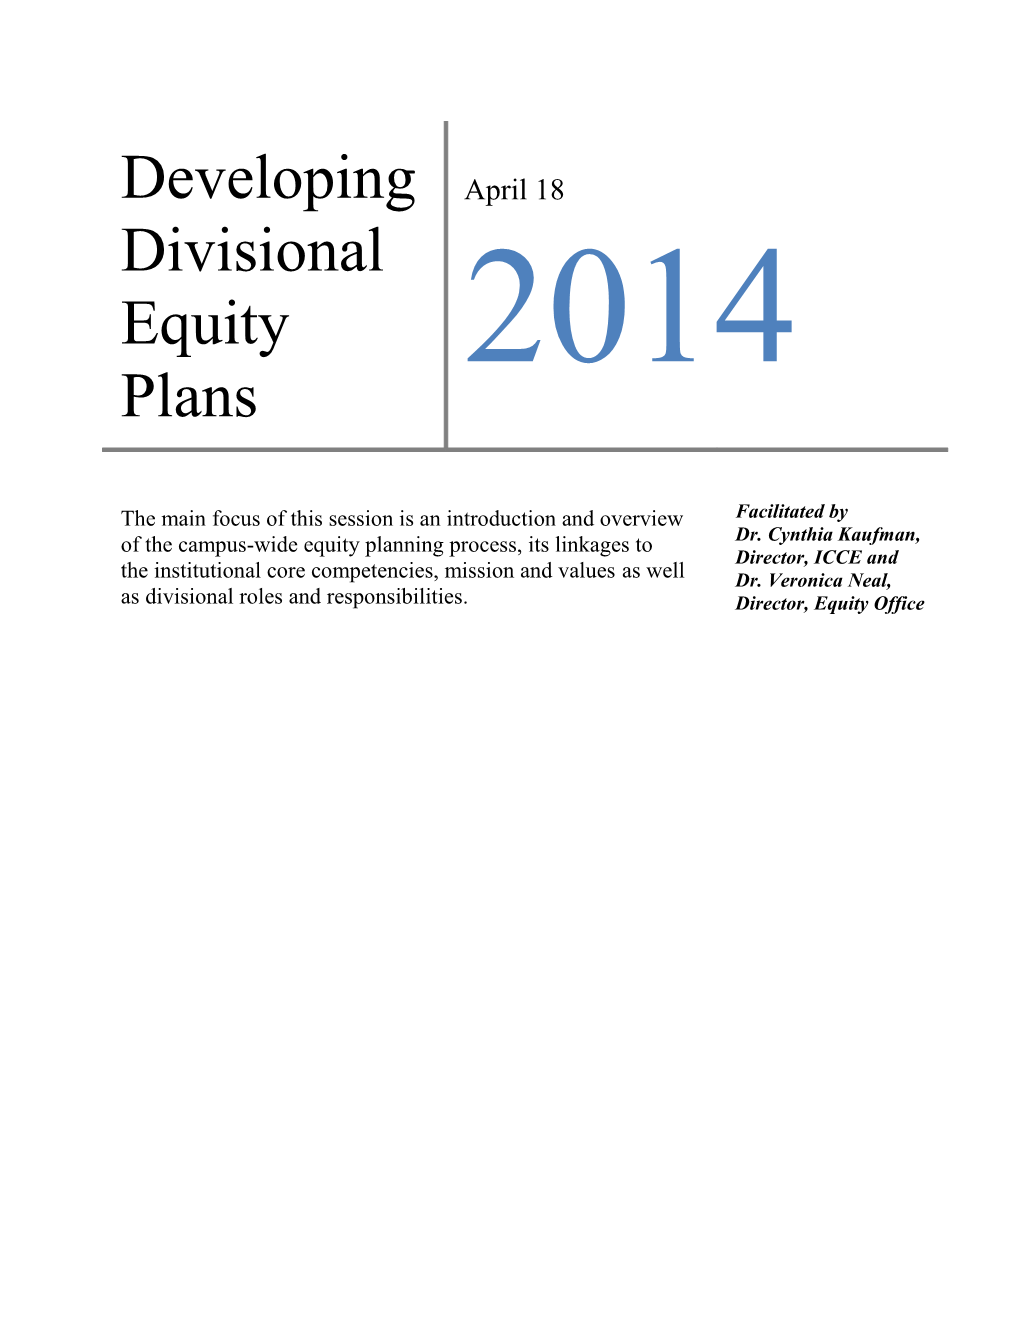 Developing Divisional Equity Plans